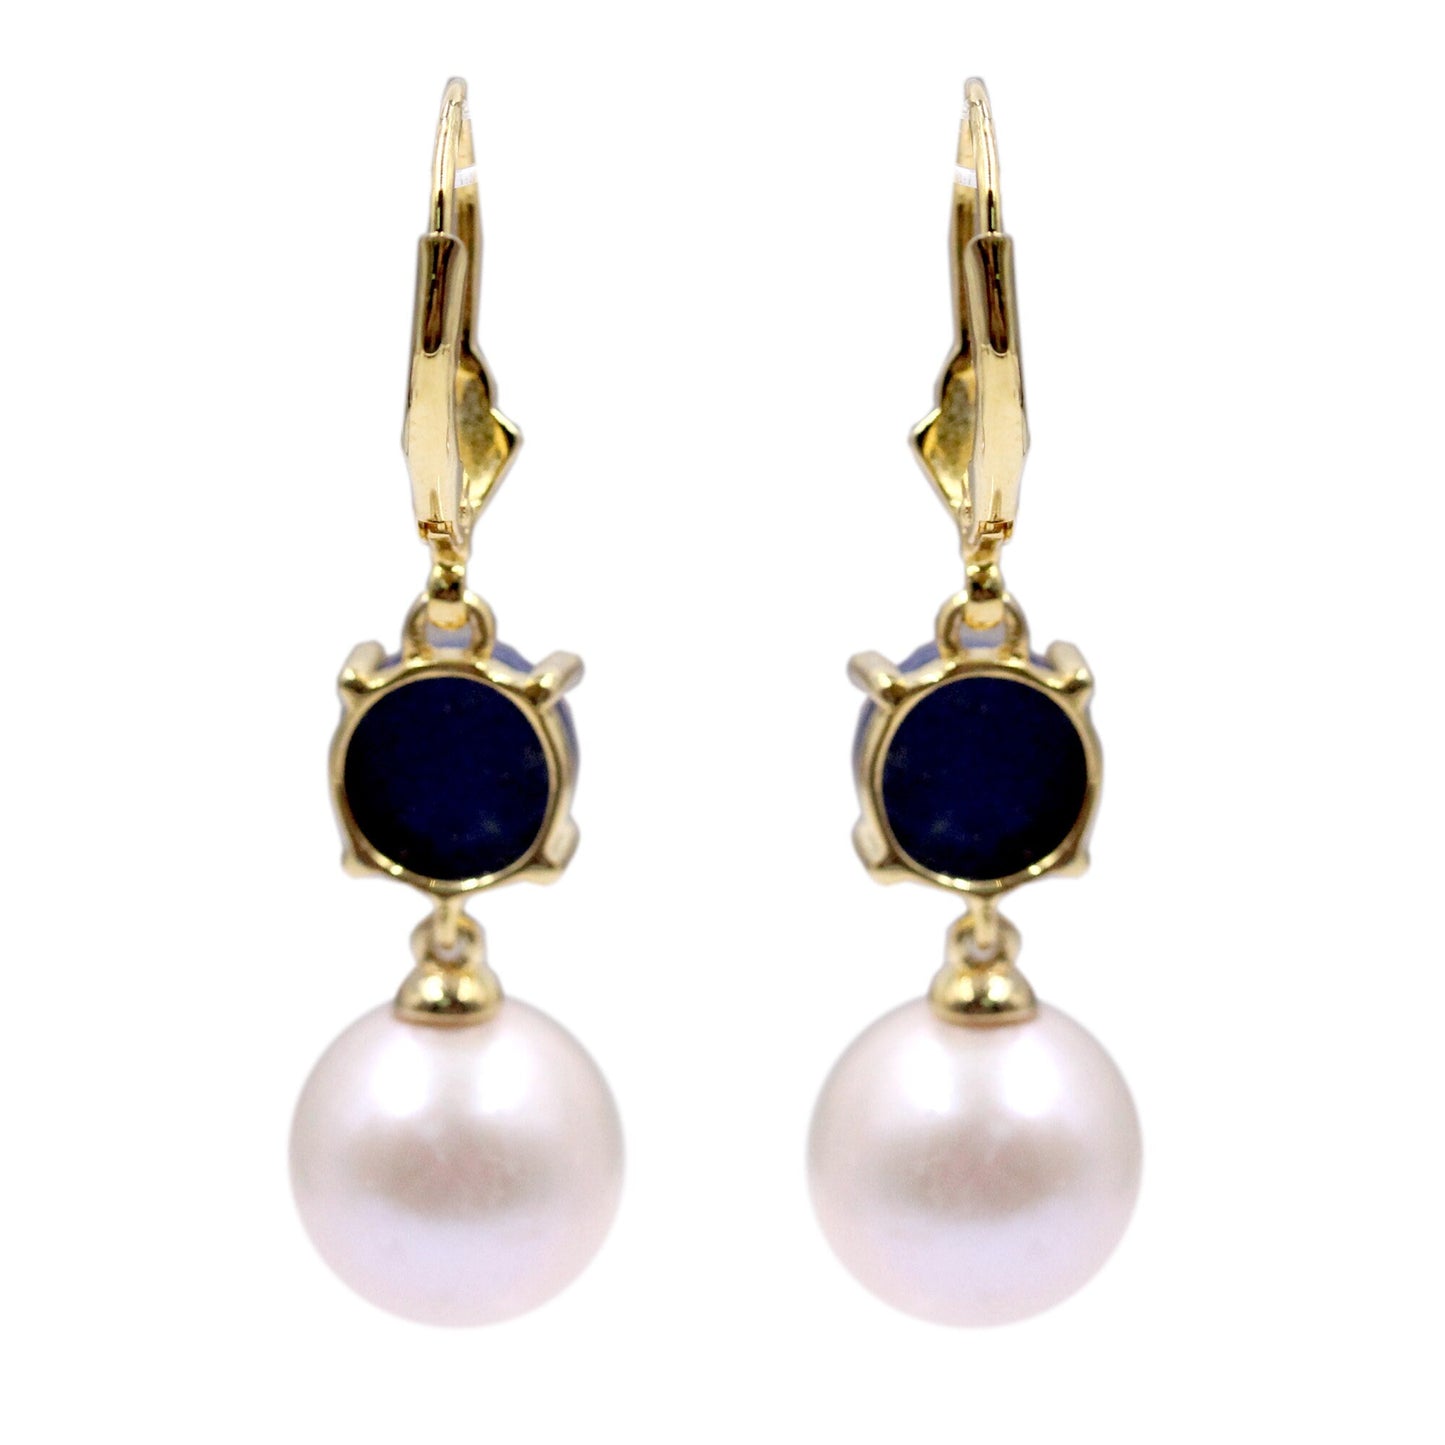 Natural Pearl With Lapis Lazuli Gemstone Earrings, 925 Sterling Silver Over Gold Plated Drop Earrings, Gift For Her